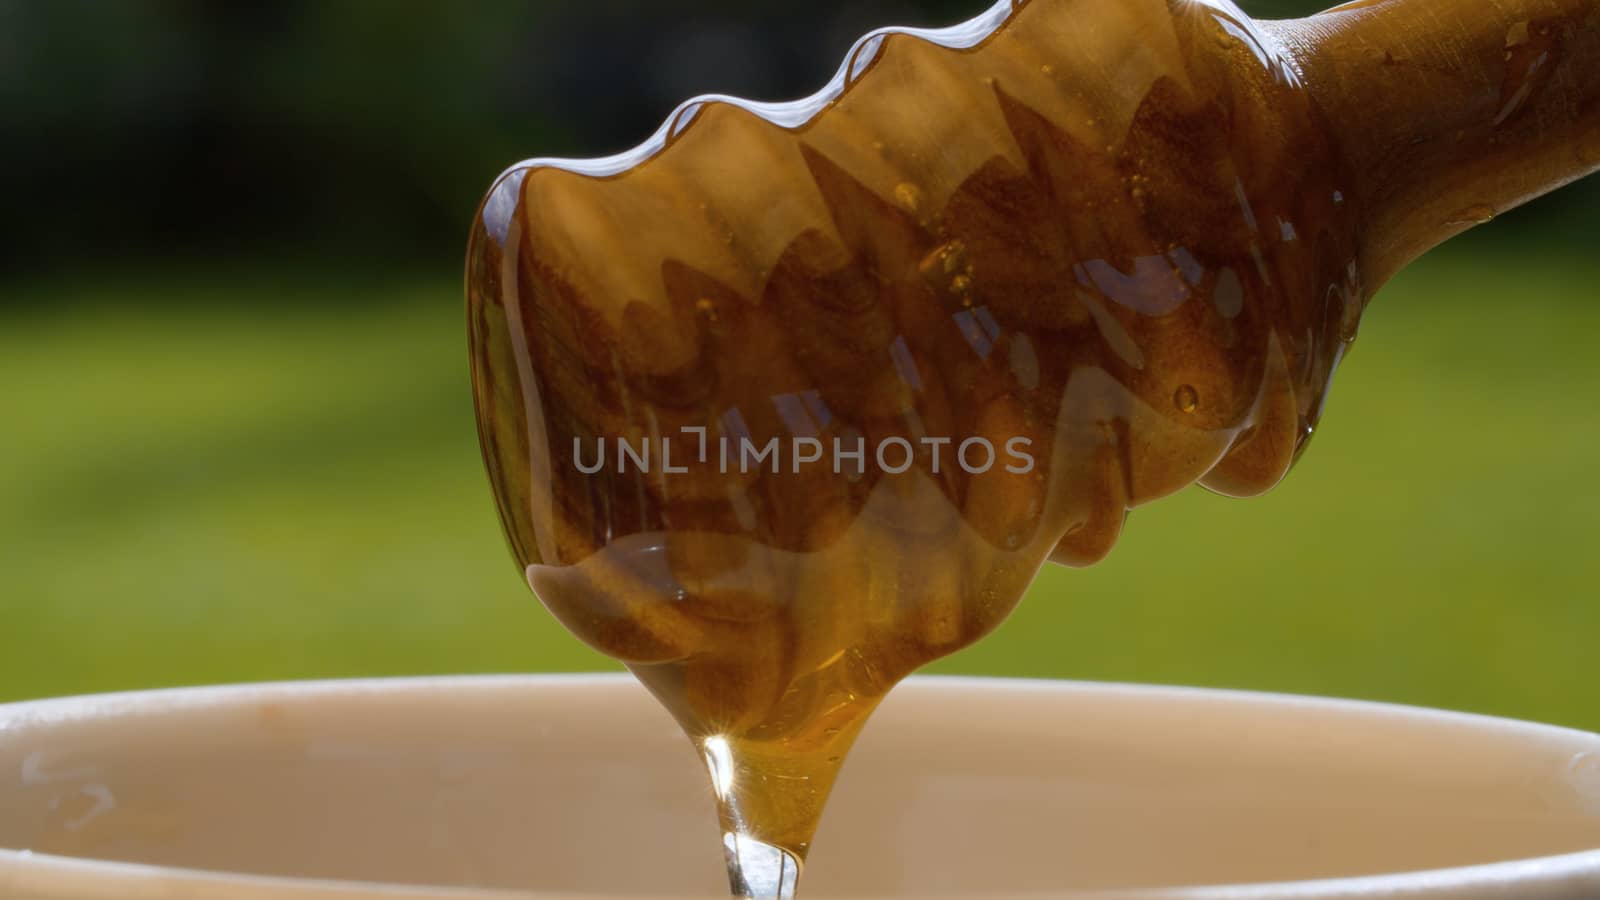 Extreme close up honey pouring from honey spoon into a bowl on blurry natural background at summer day. Beautiful sun glare on honey. Healthy fresh food concept